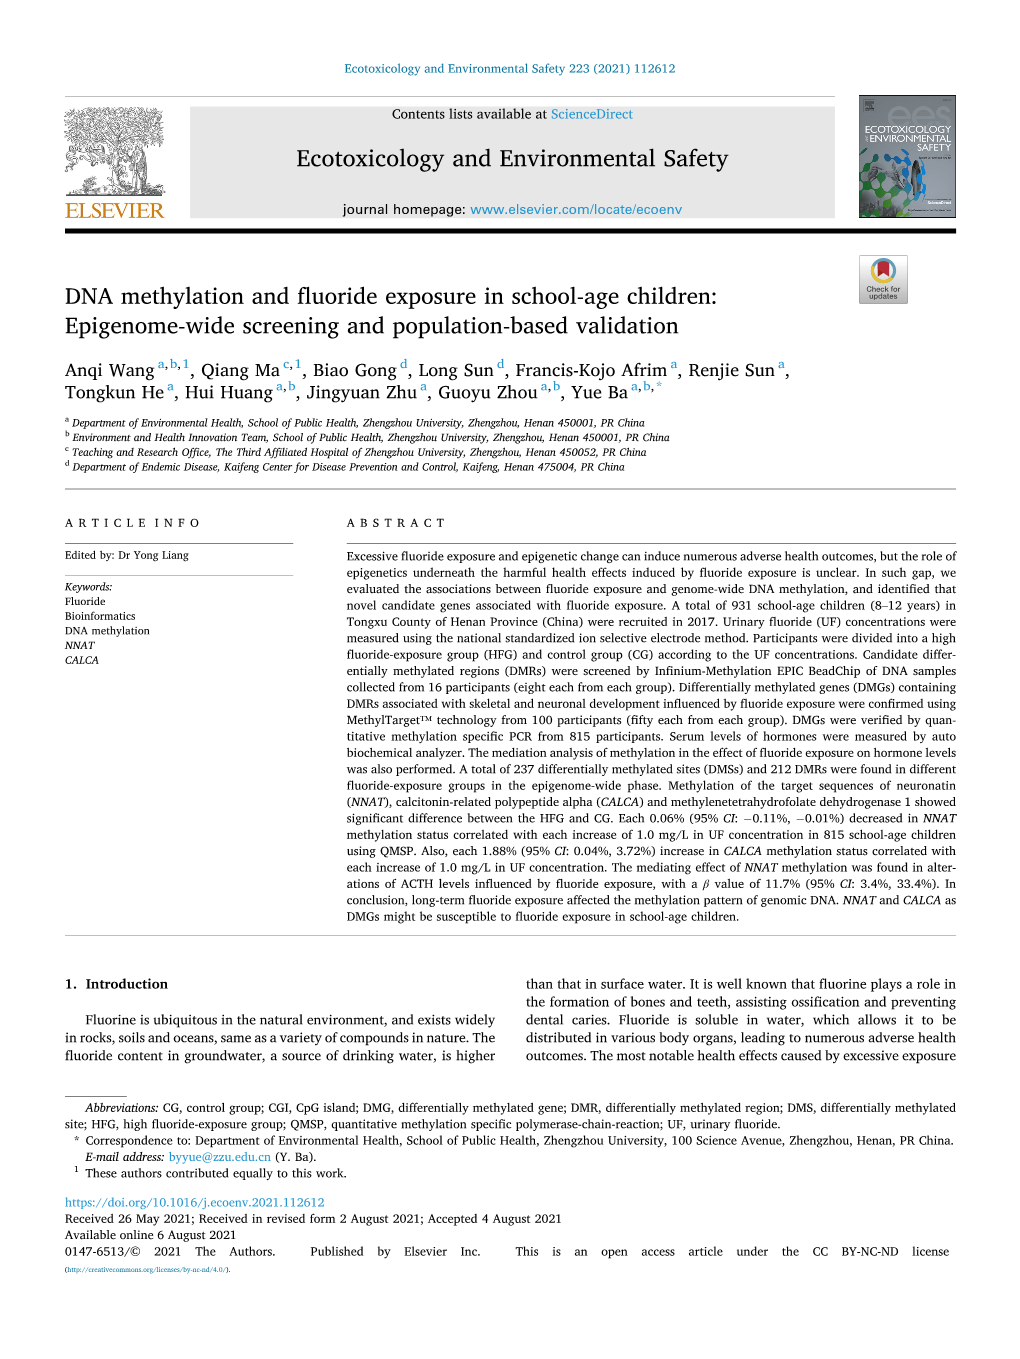 DNA Methylation and Fluoride Exposure in School-Age Children: Epigenome-Wide Screening and Population-Based Validation